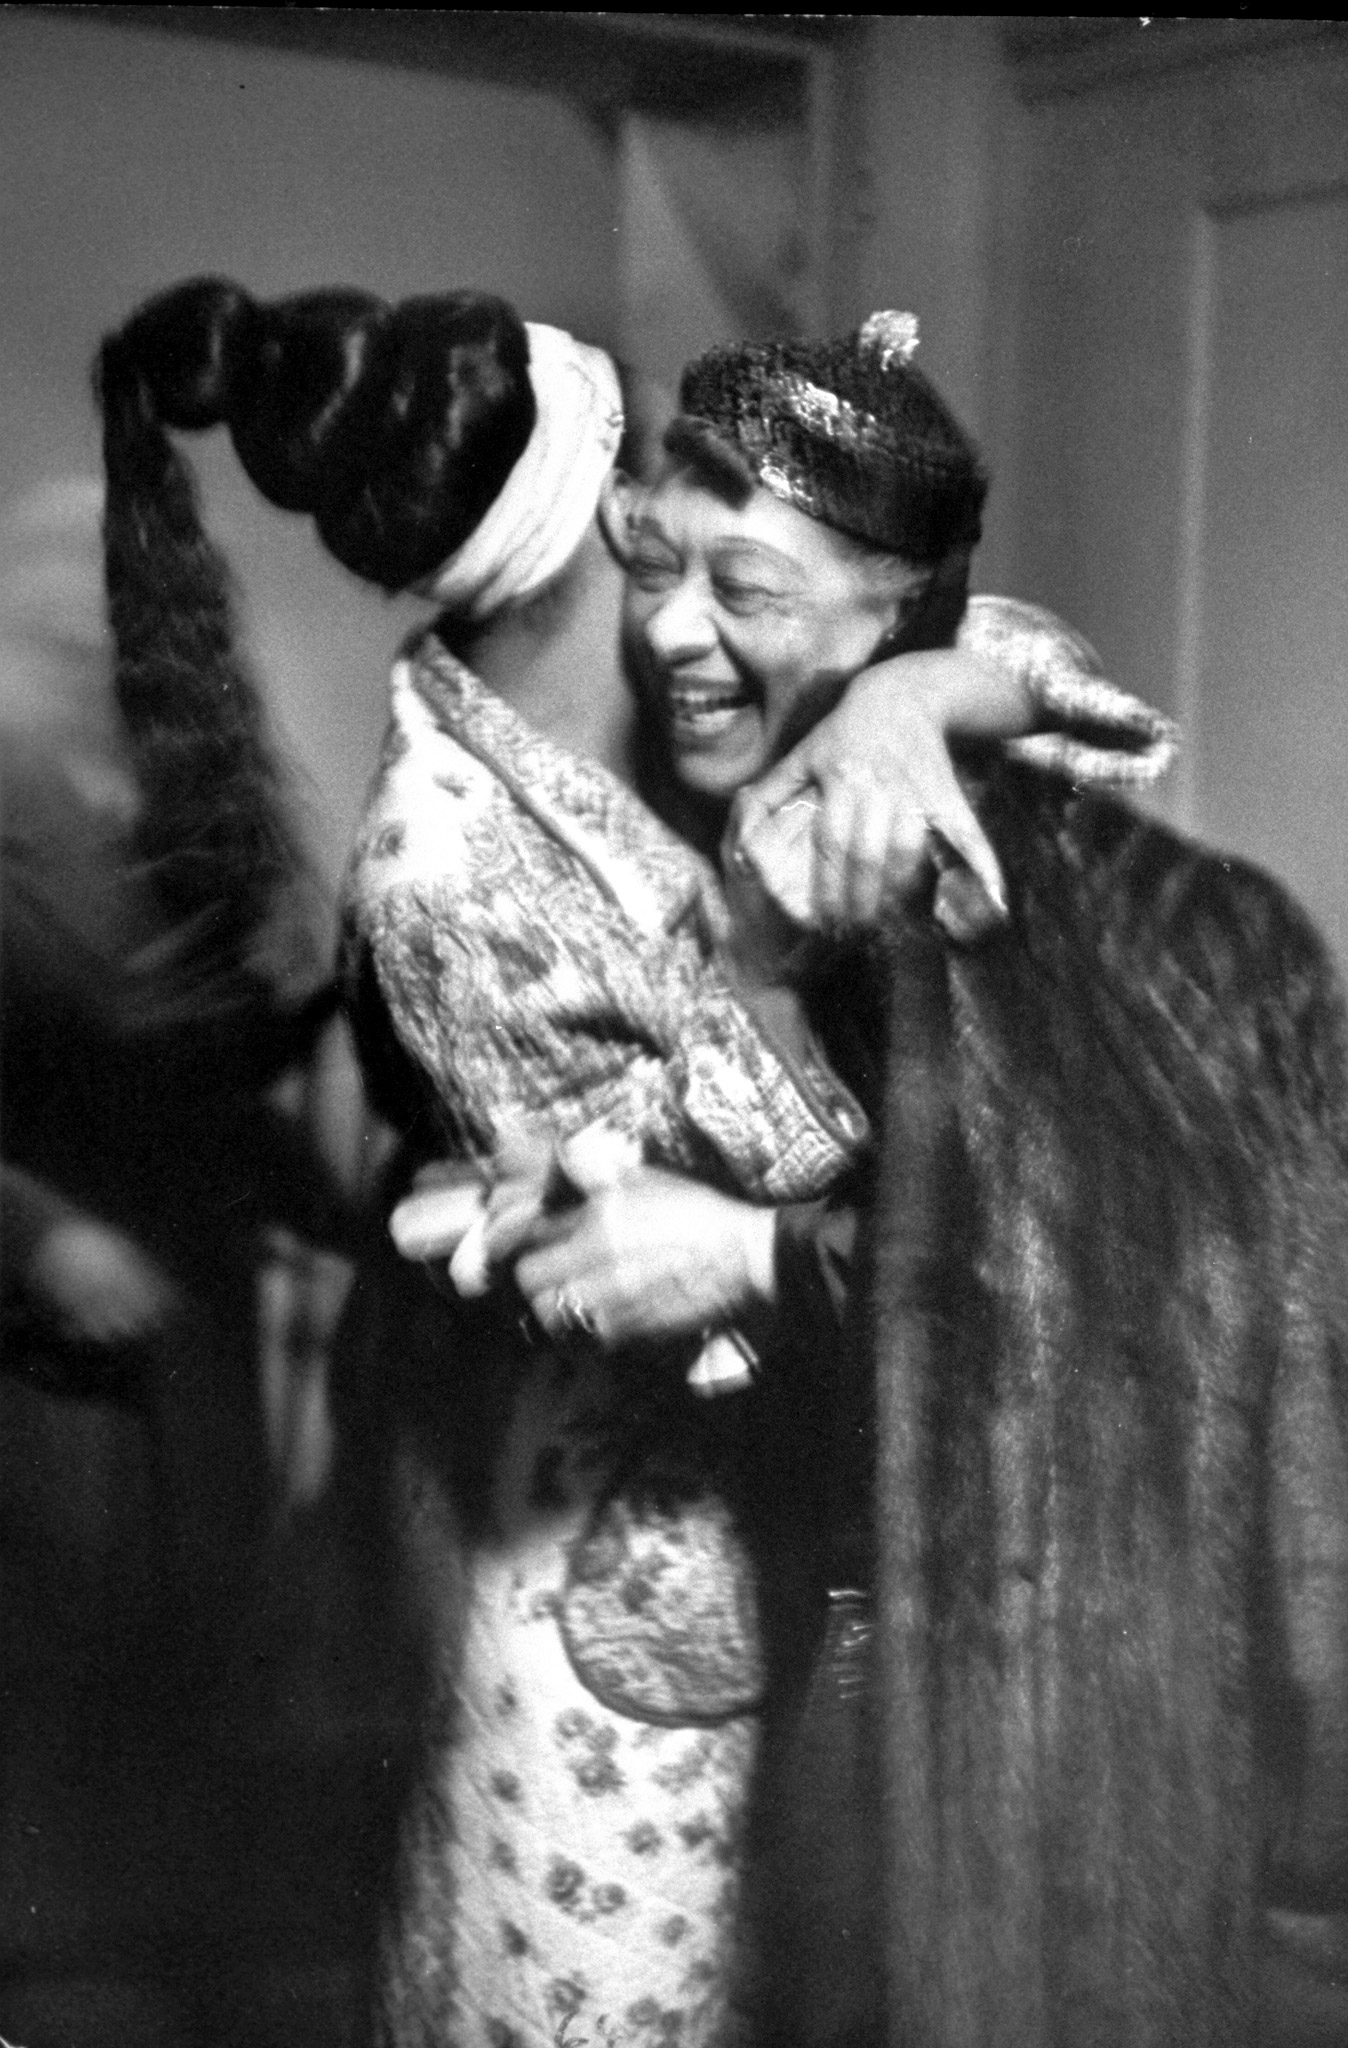 Josephine Baker receiving hug from columnist and friend Nora Ray Holt in her dressing room after her show at the Strand theater, 1951.